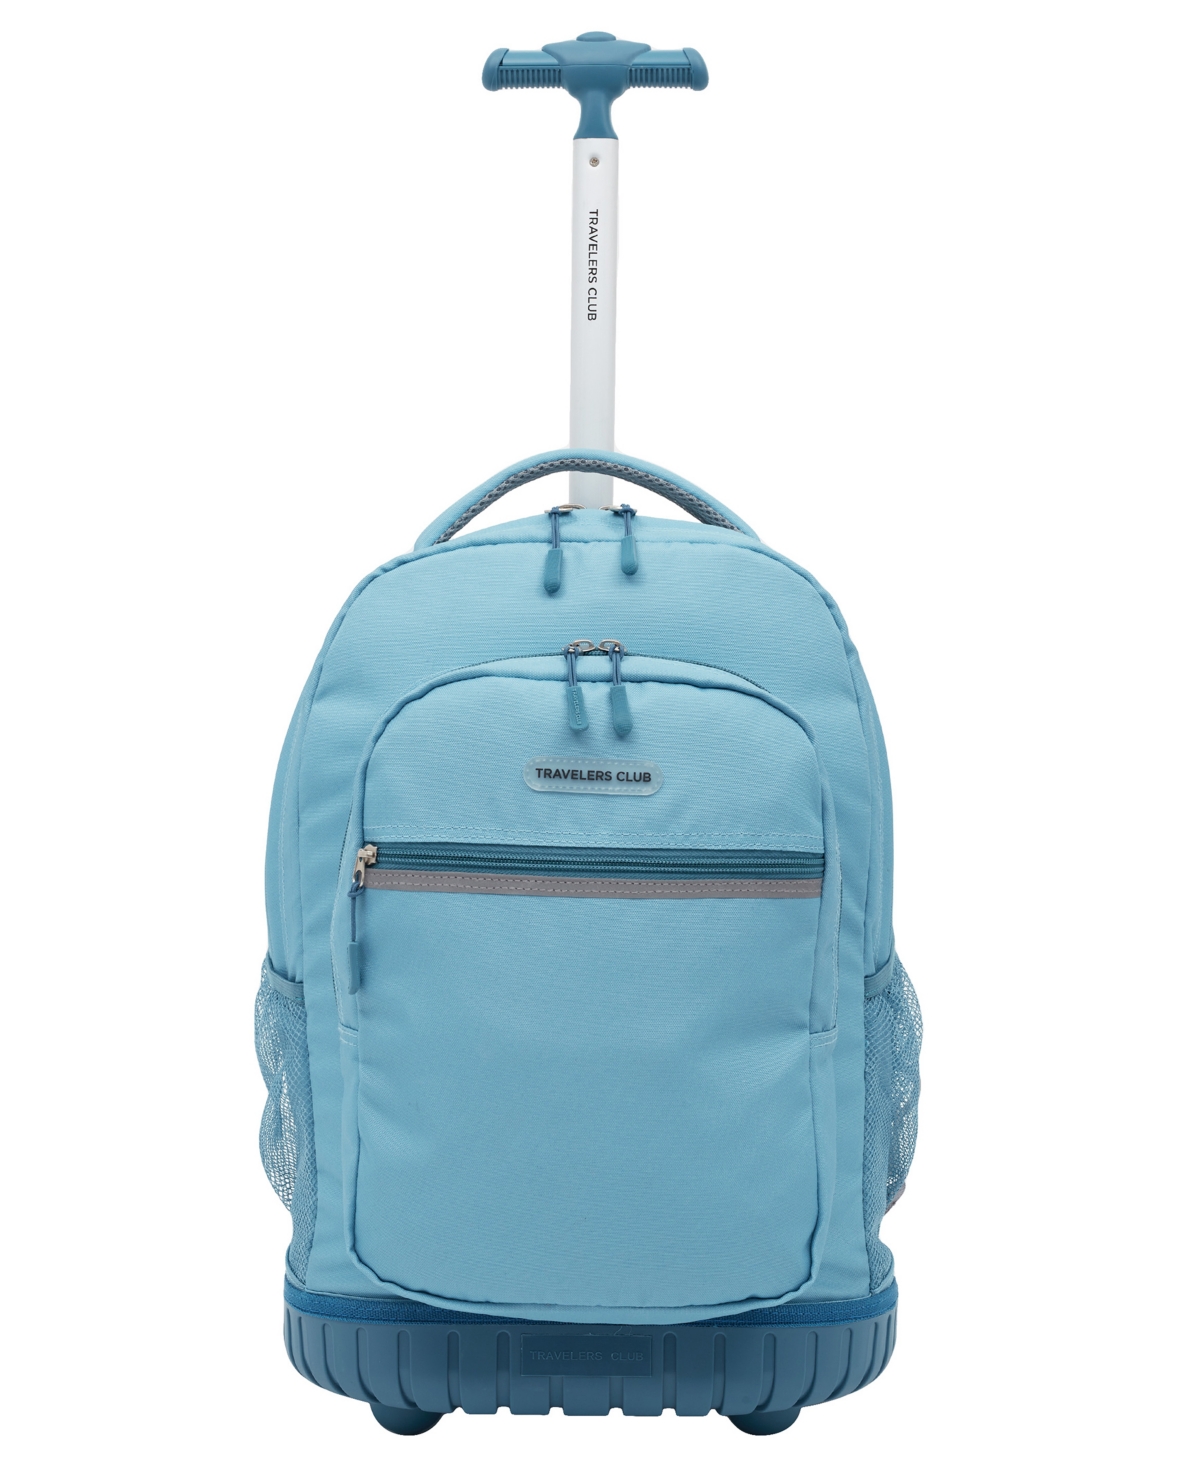 Travelers Club Finley Collection 18" Rolling Backpack In Aqua